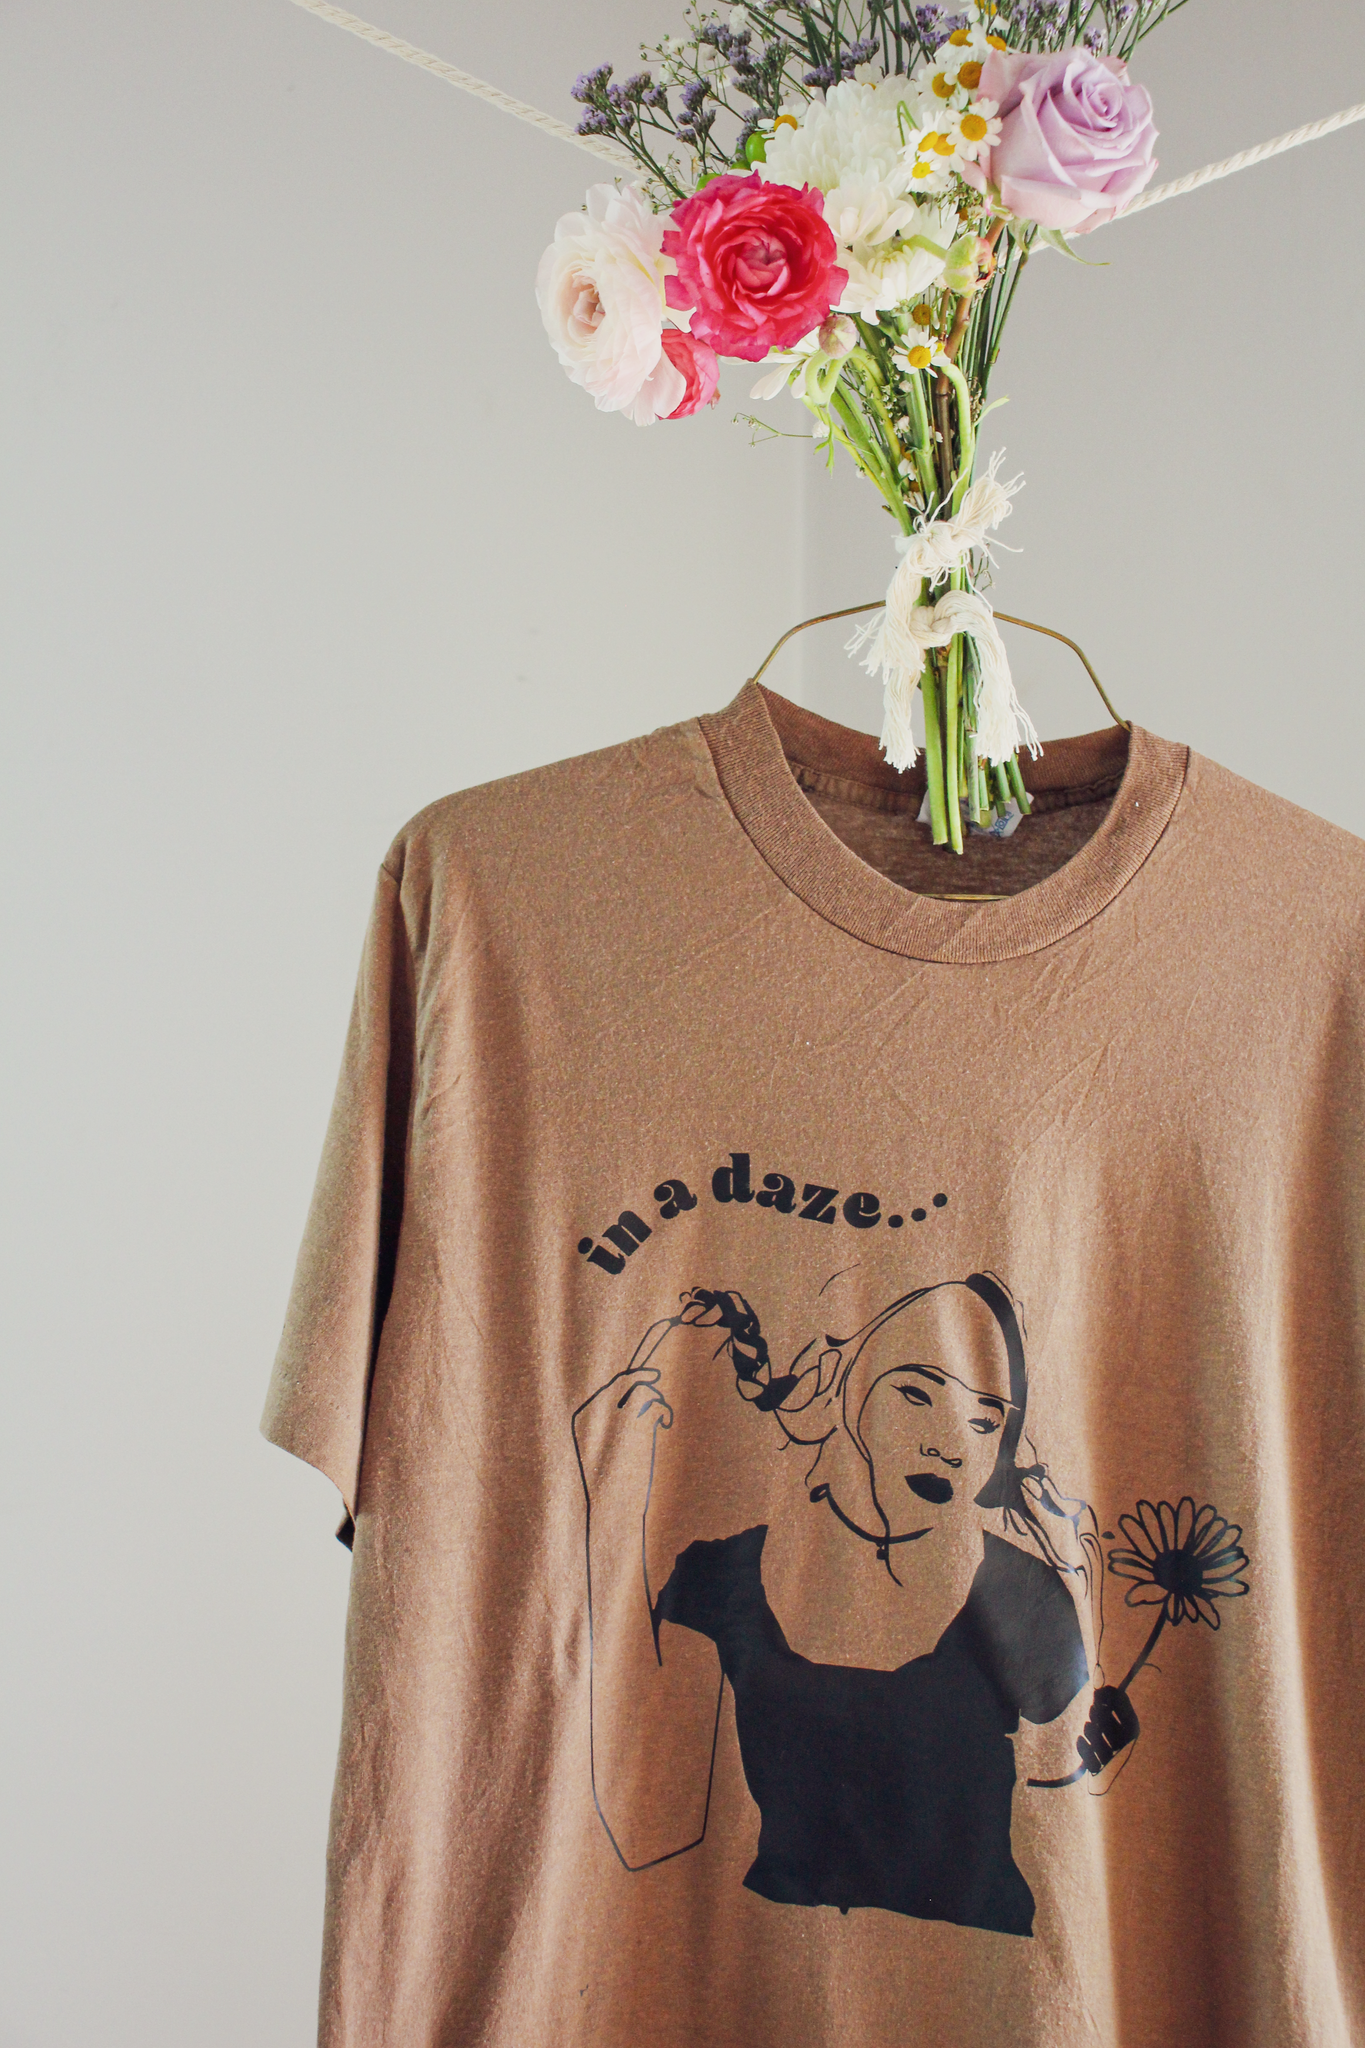 A brown t-shirt with a black illustration of a girl holding a flower and text that reads "in a daze...."